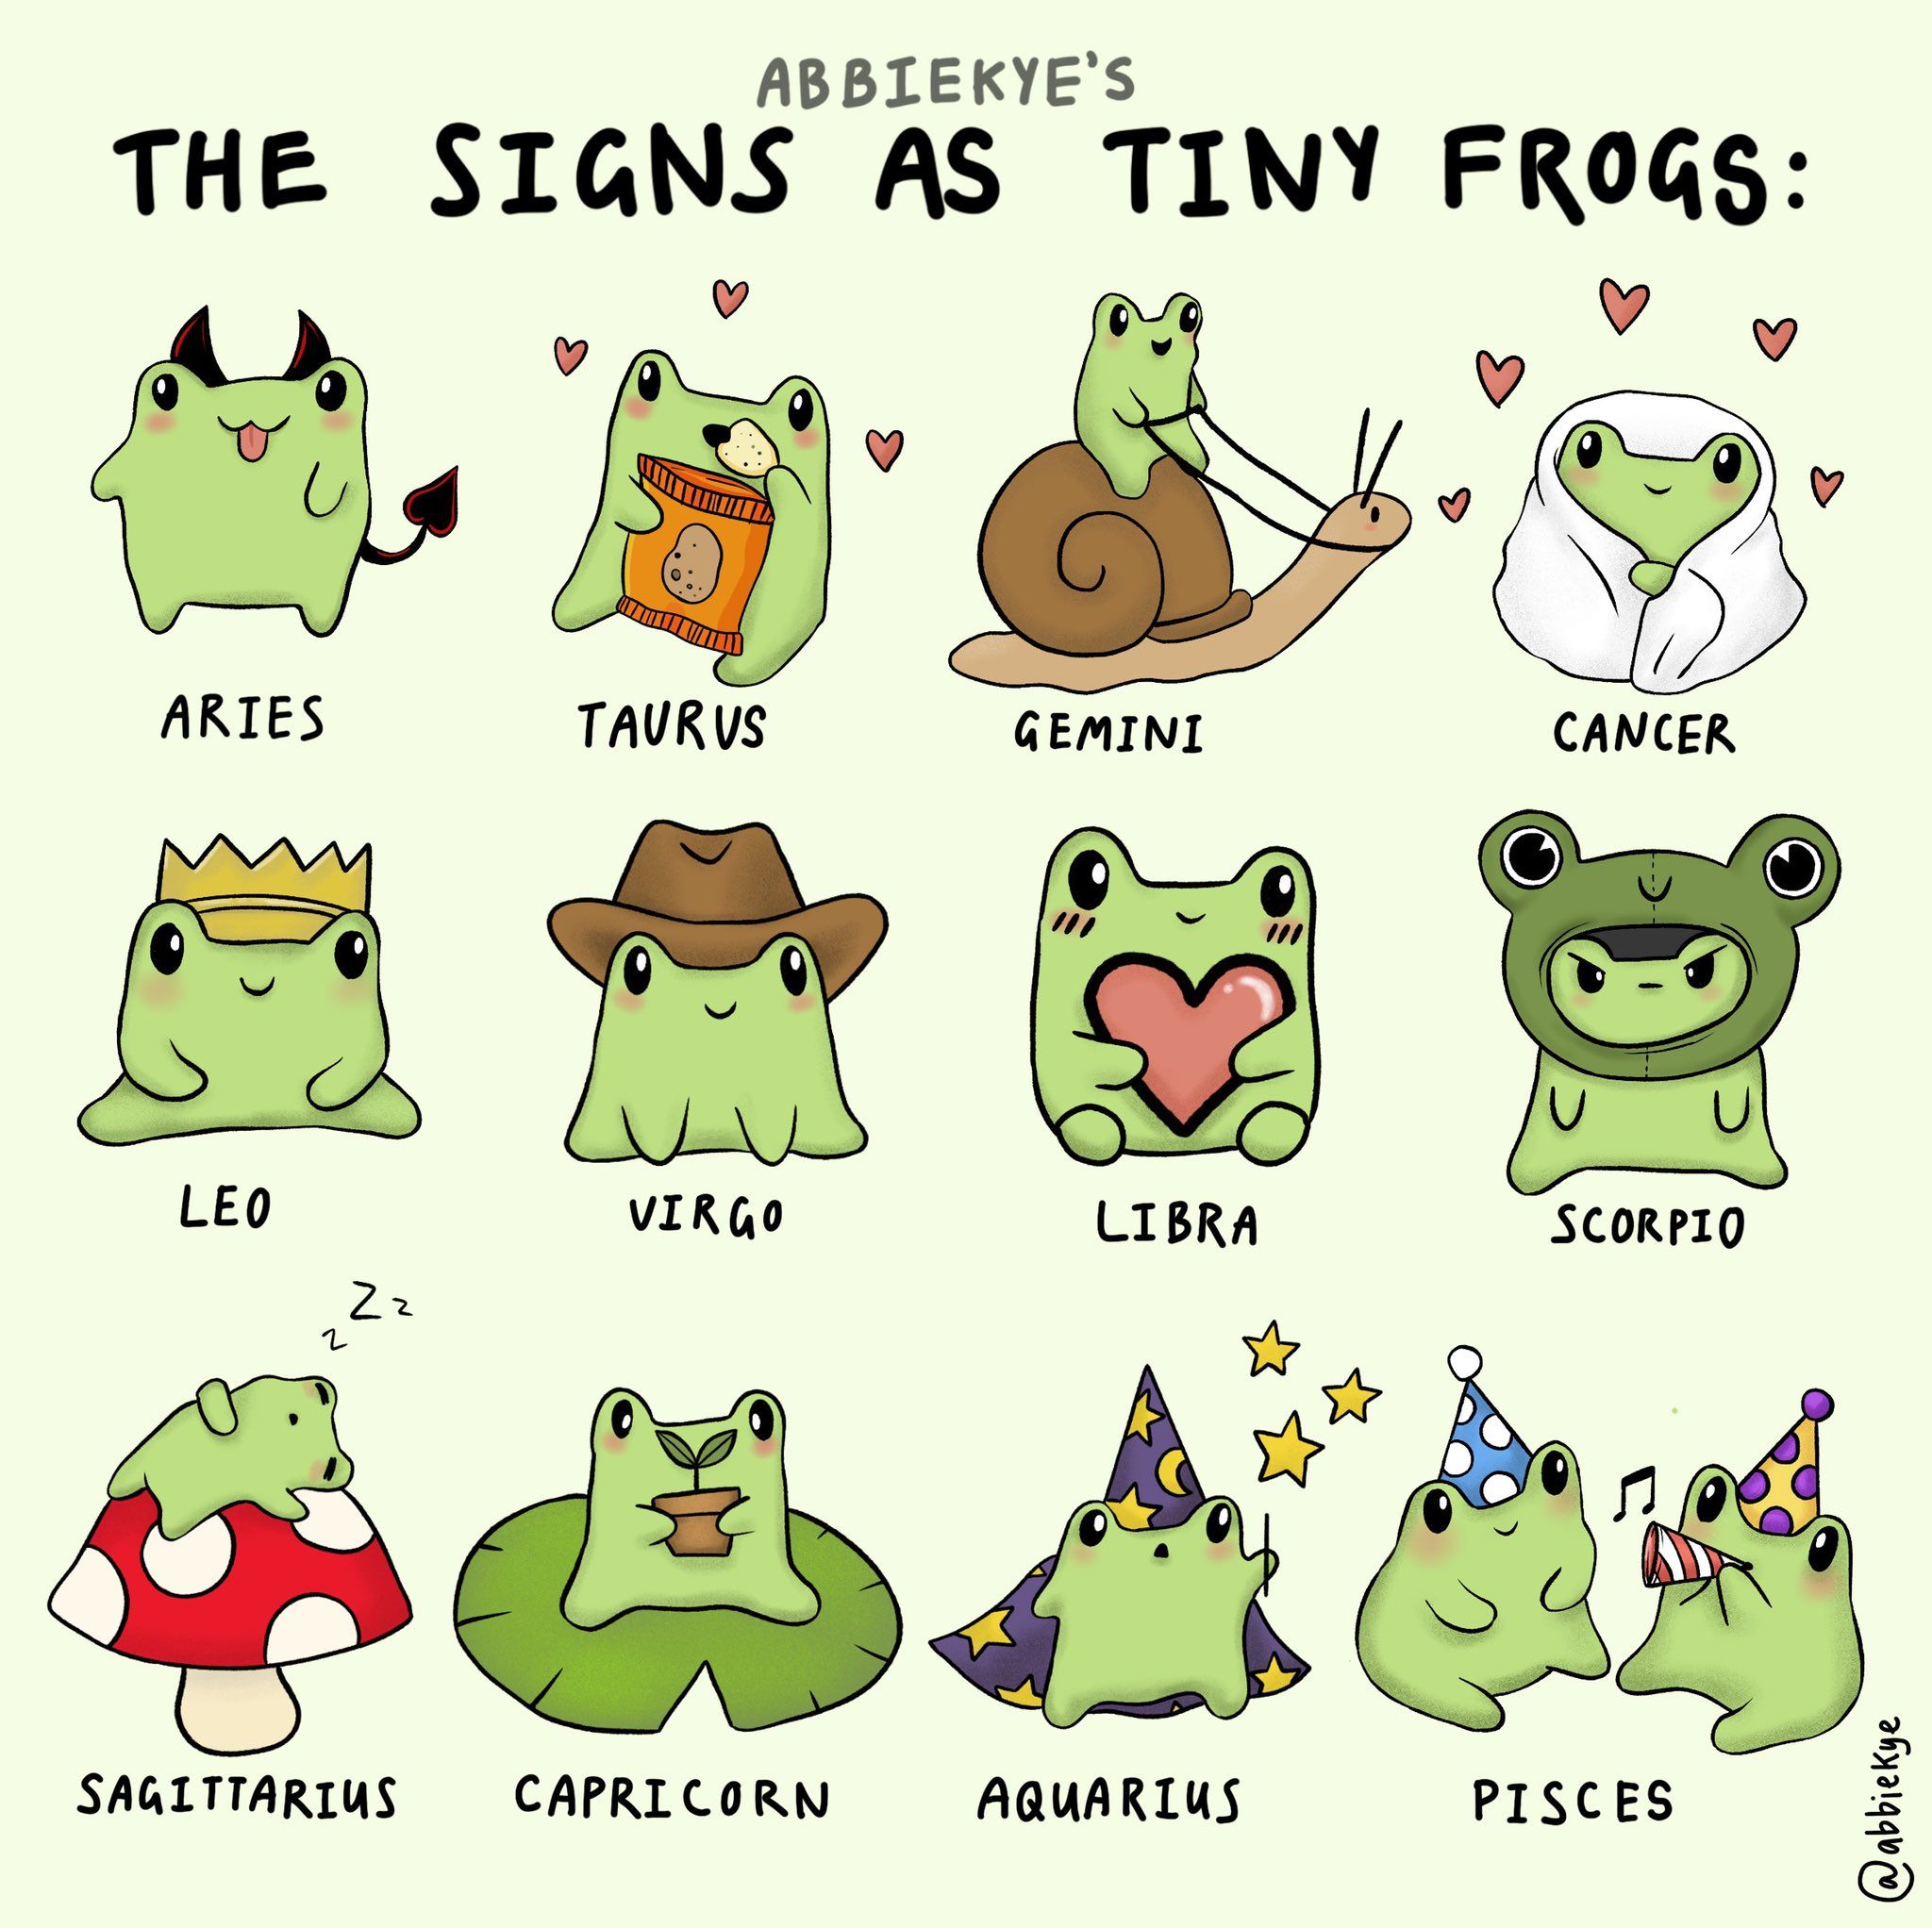 Abbie on Twitter. Frog drawing, Frog art, Zodiac signs funny